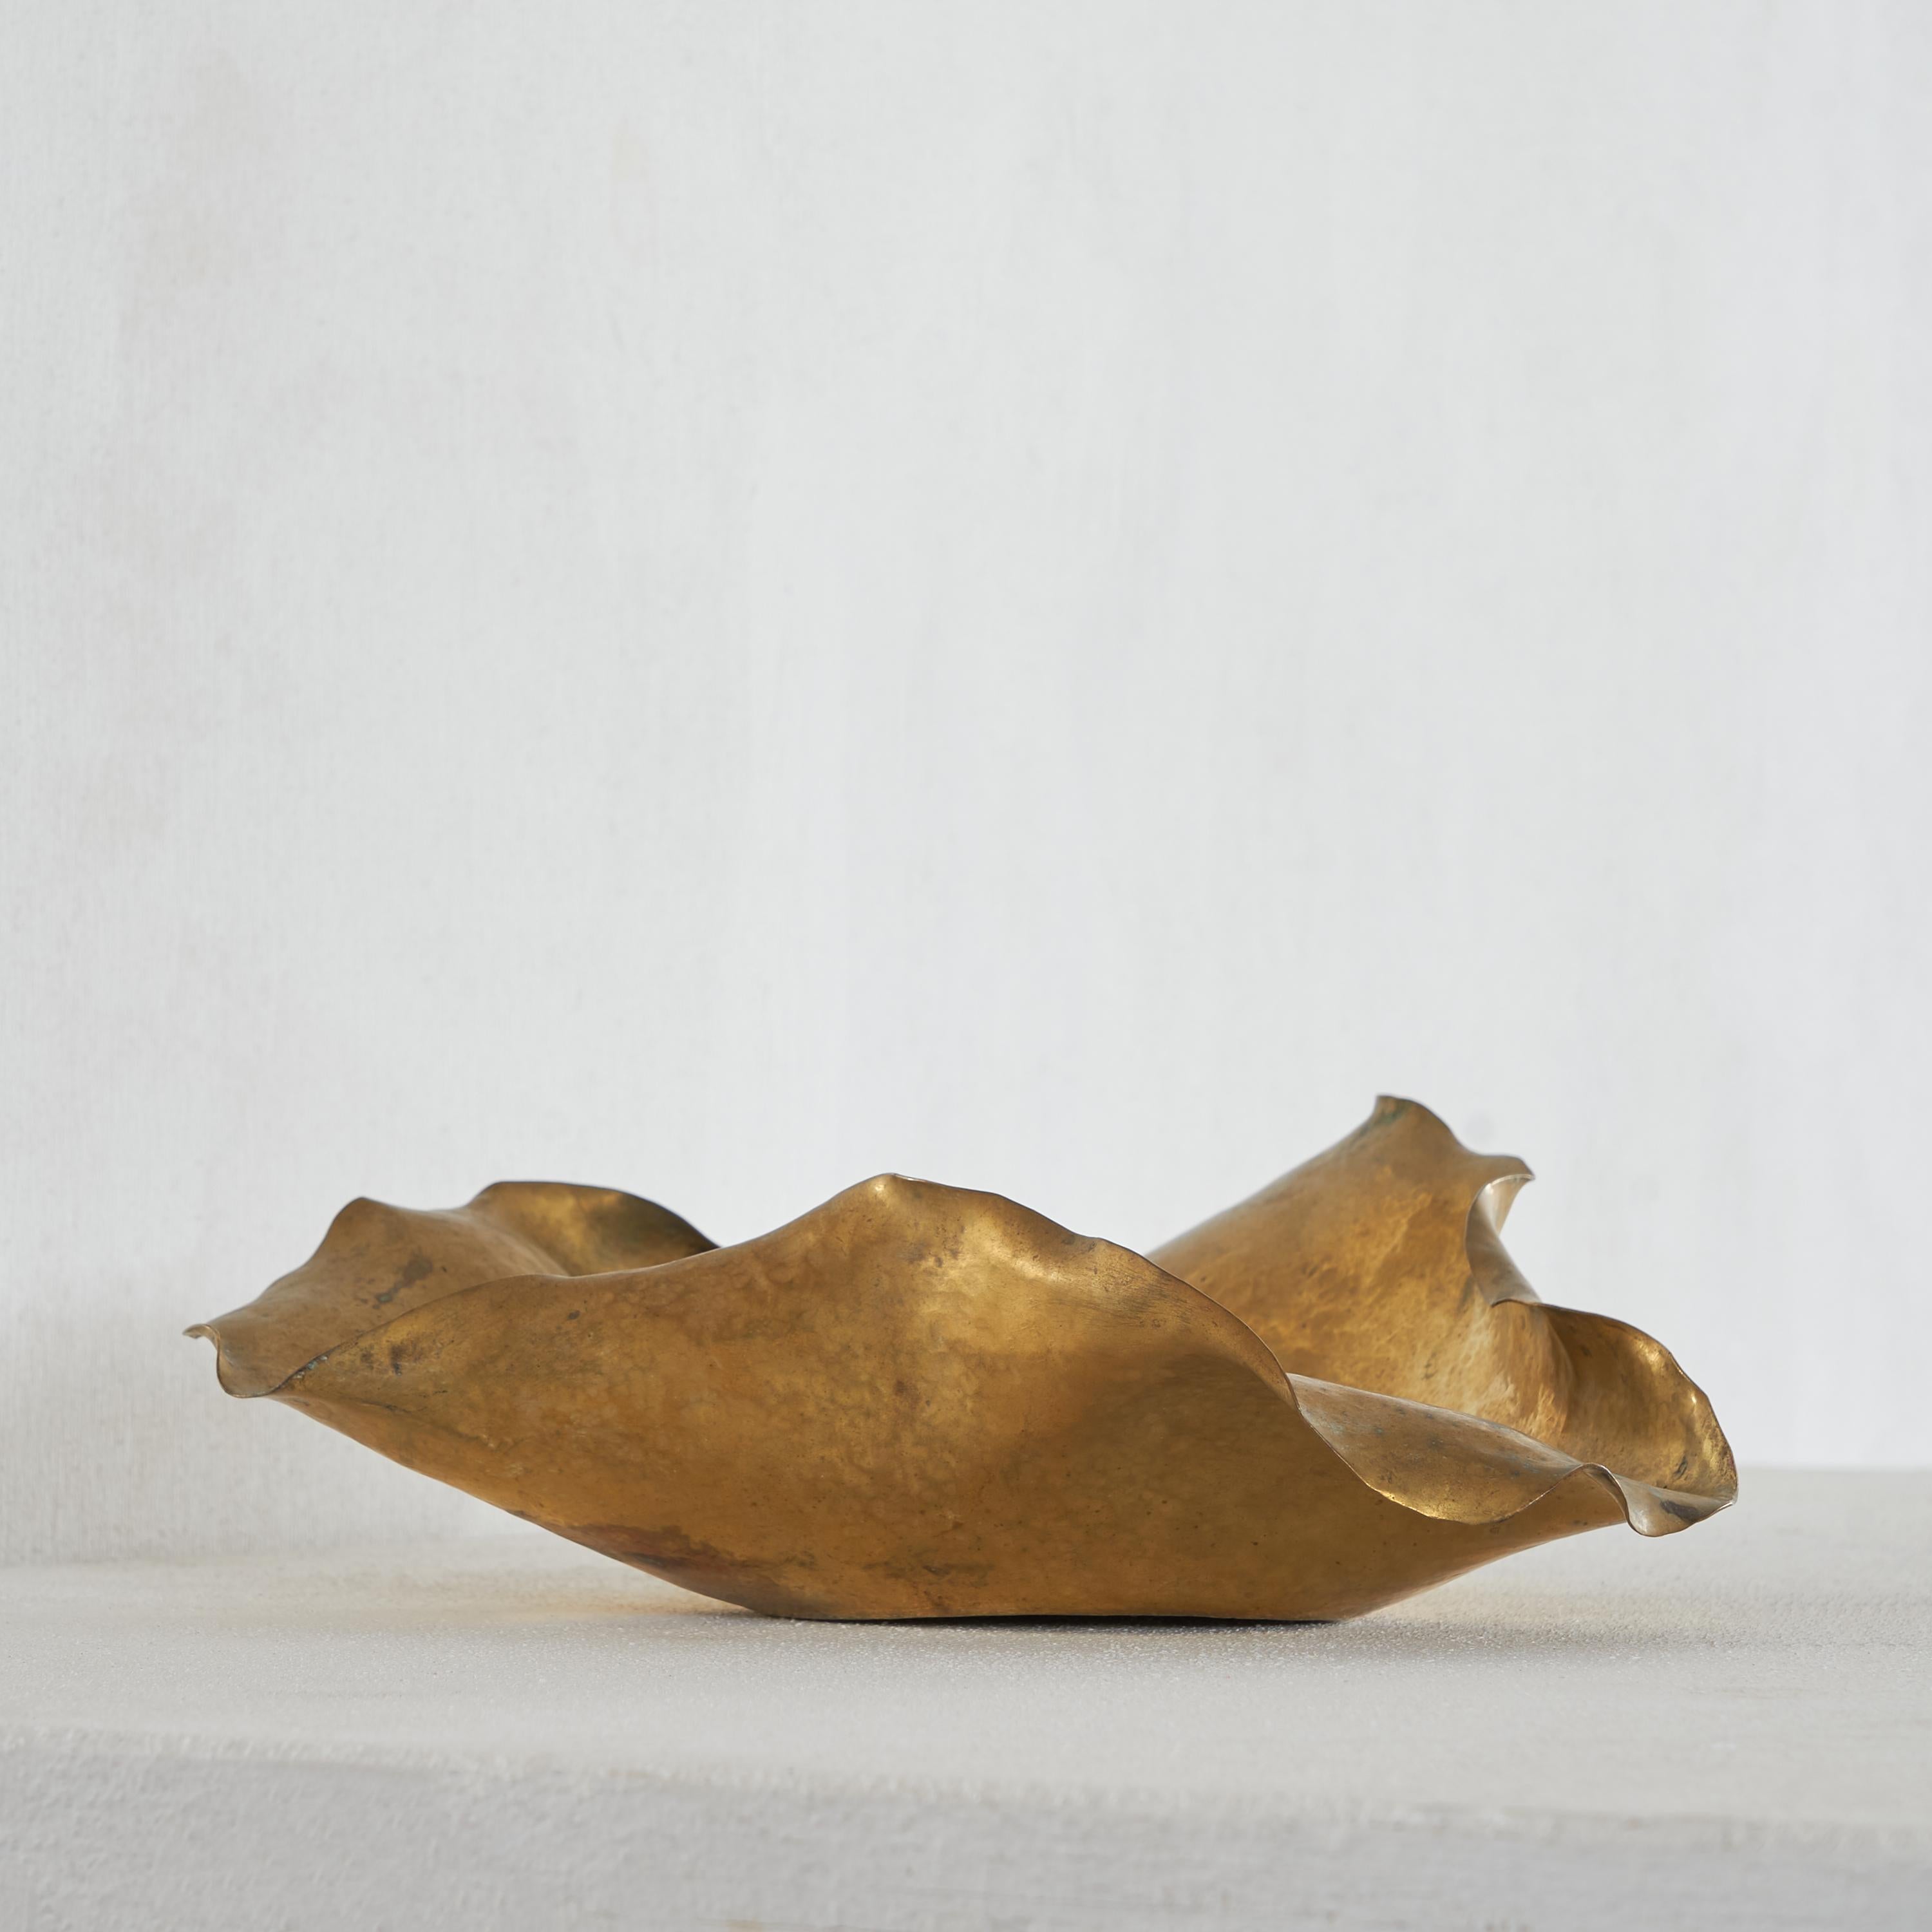 Italian Freeform Bowl in Patinated Brass